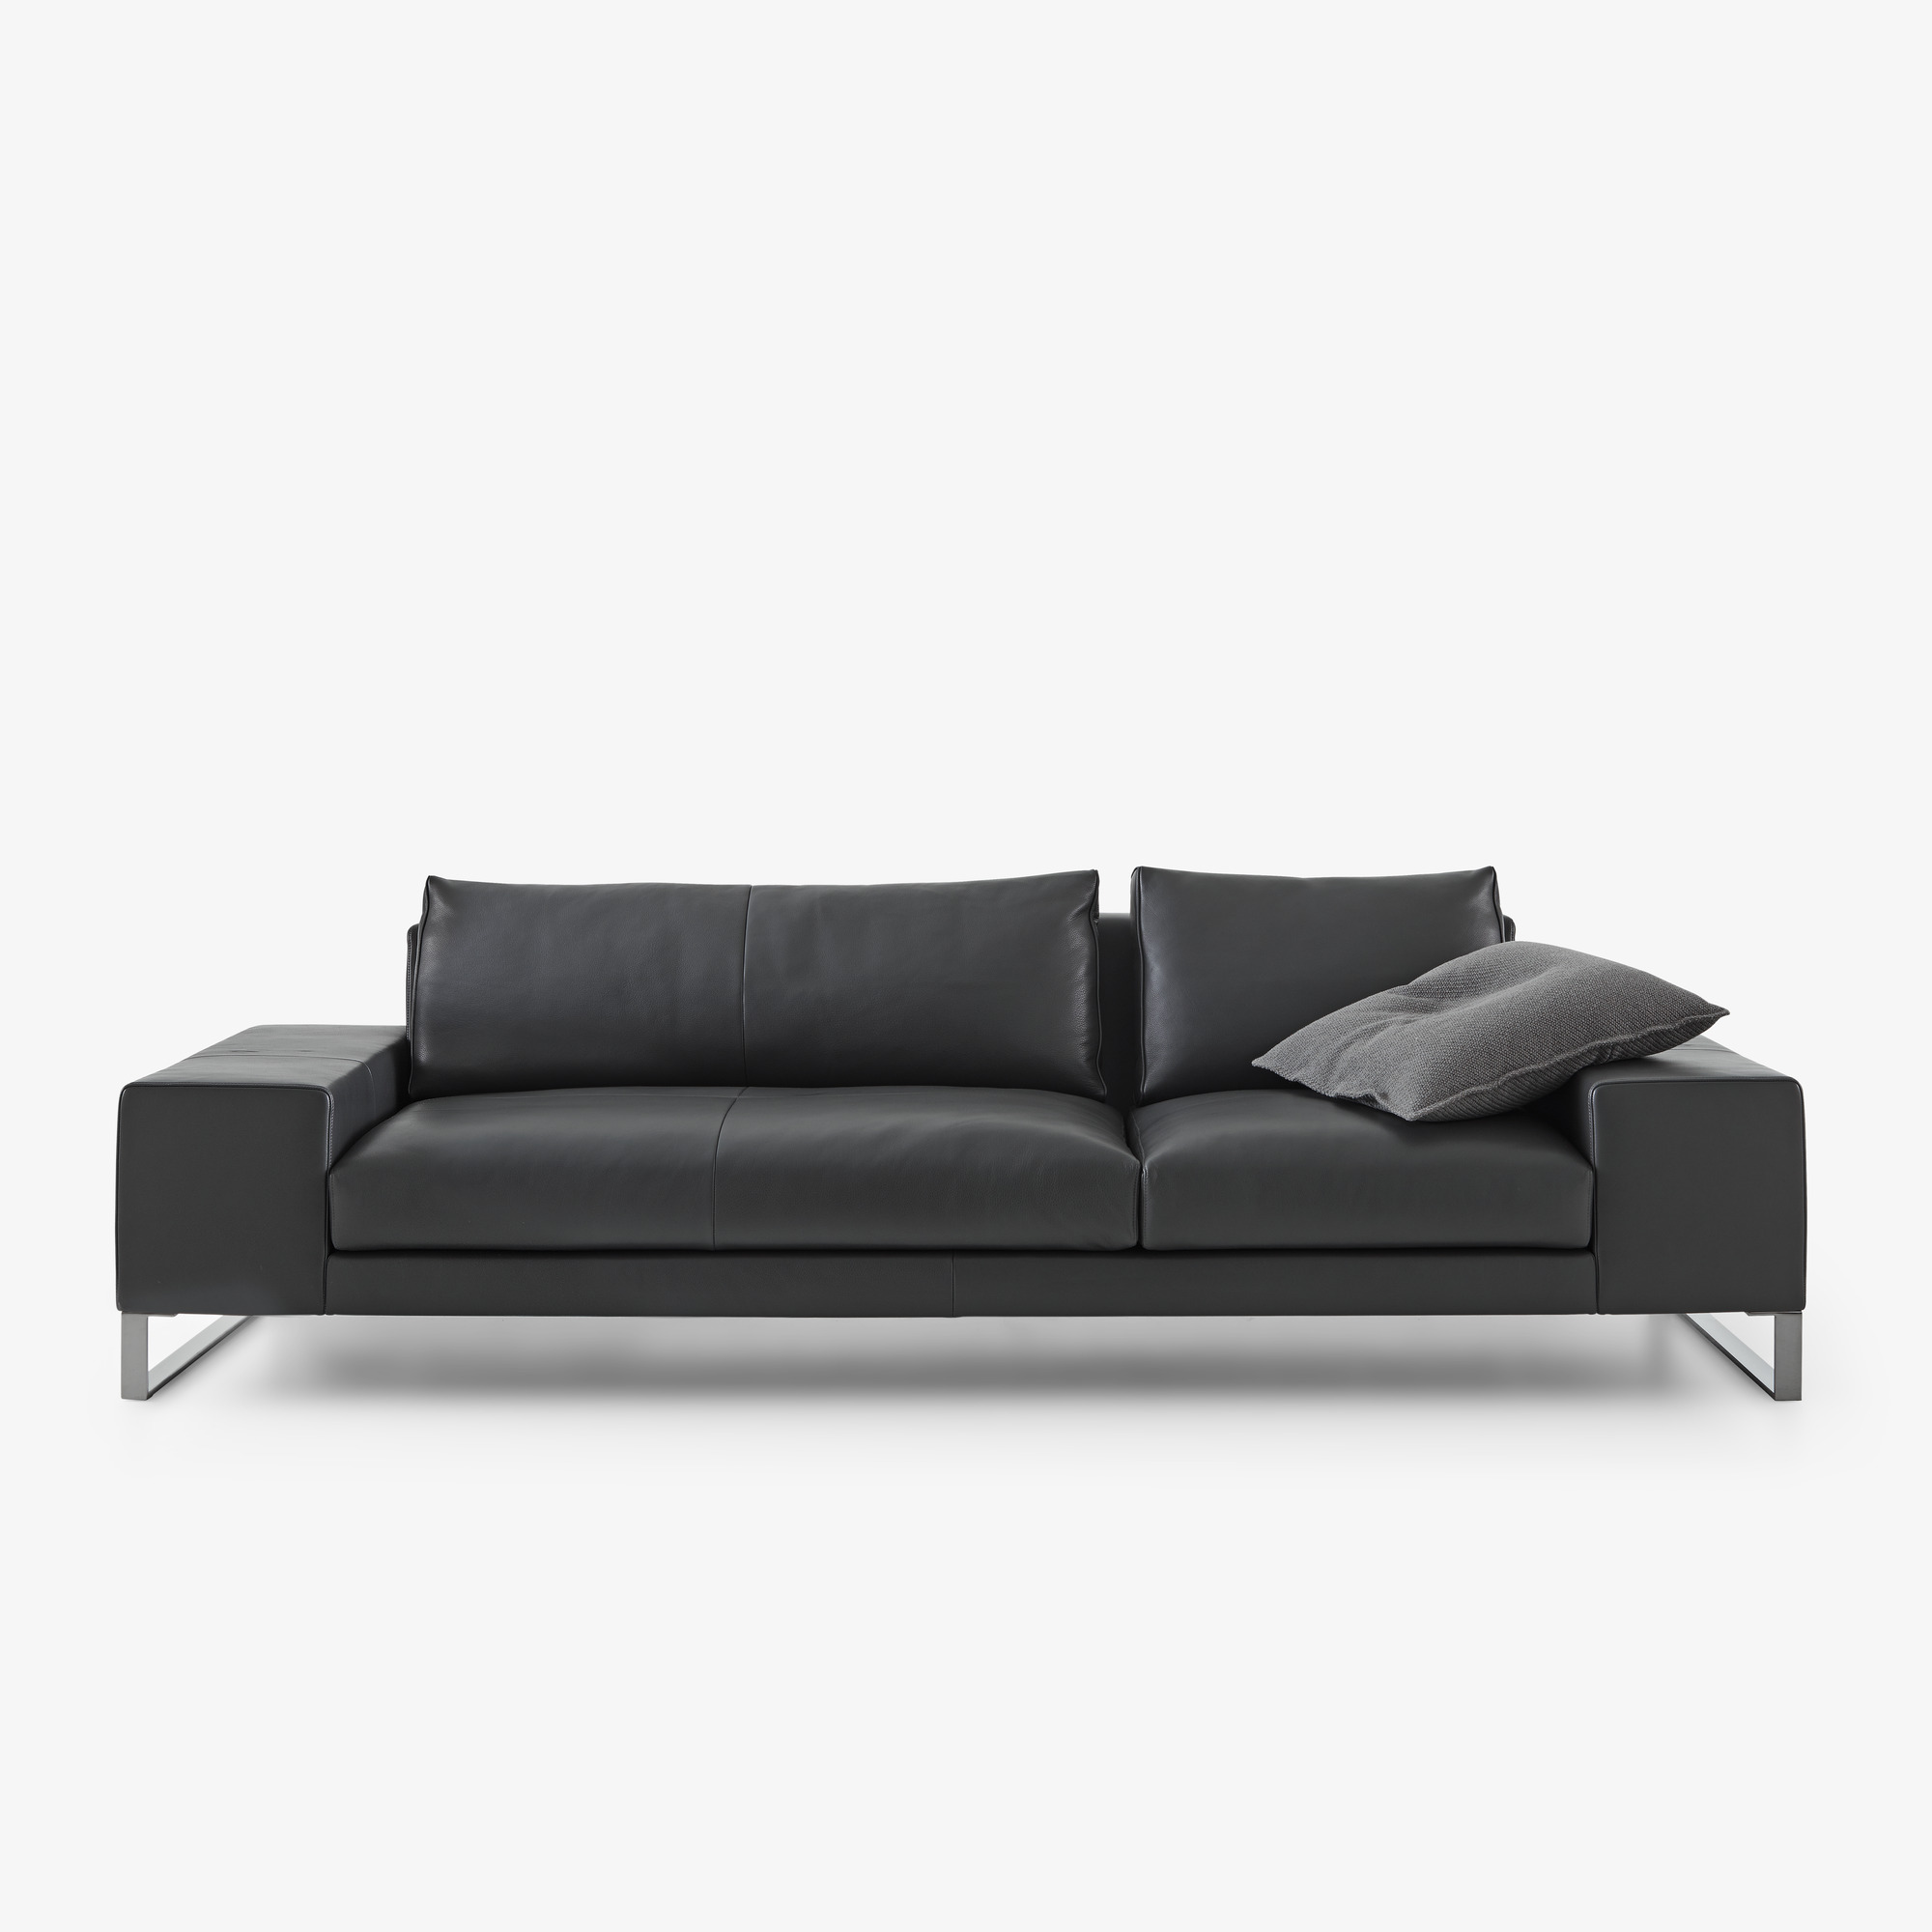 Image SOFA WITH ARMREST B COMPLETE ELEMENT